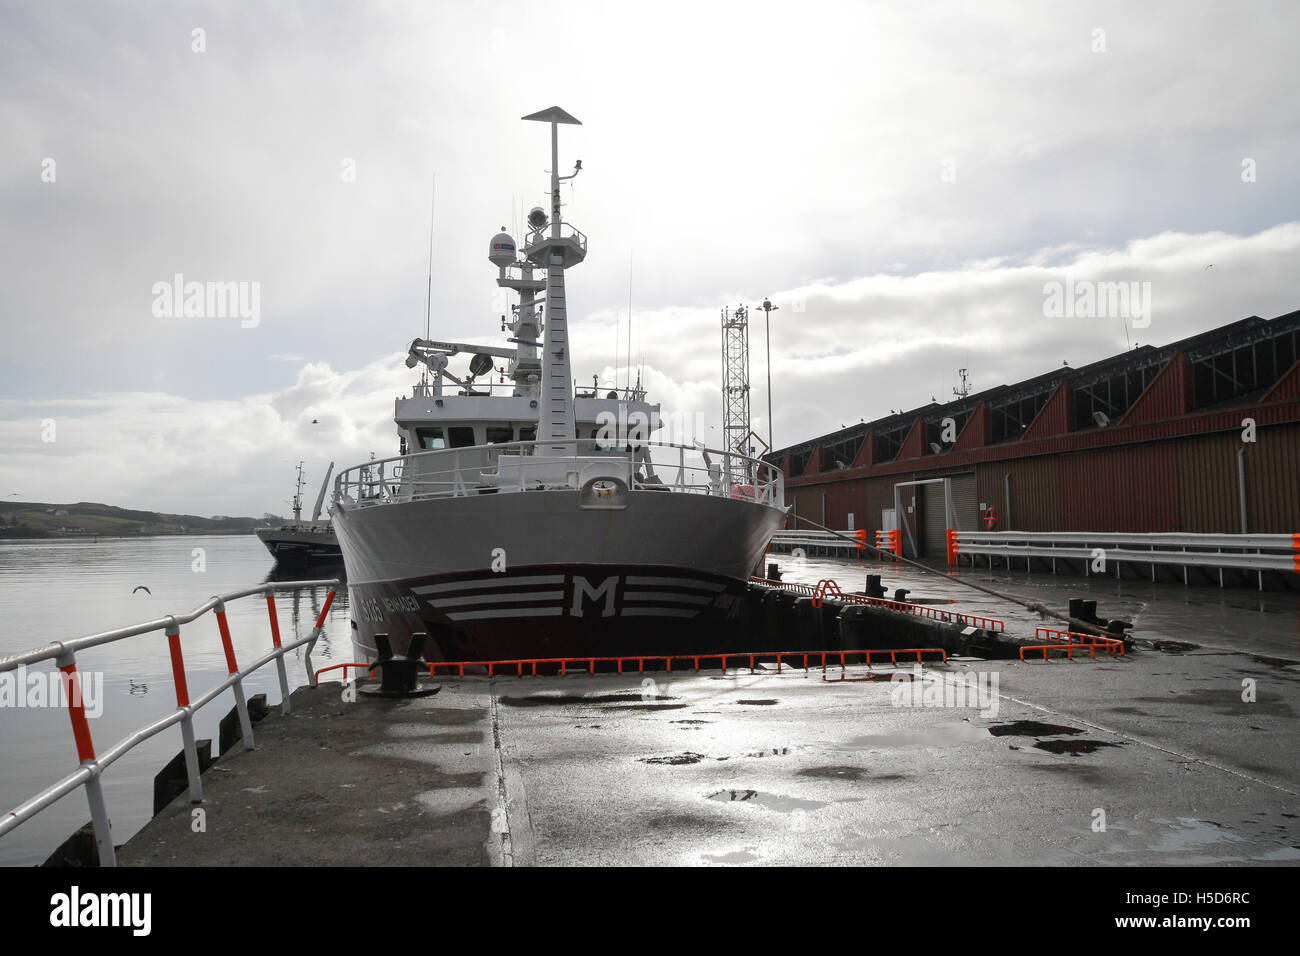 Bow of trawler Menhaden (S135) in Killybegs harbour County Donegal. Stock Photo